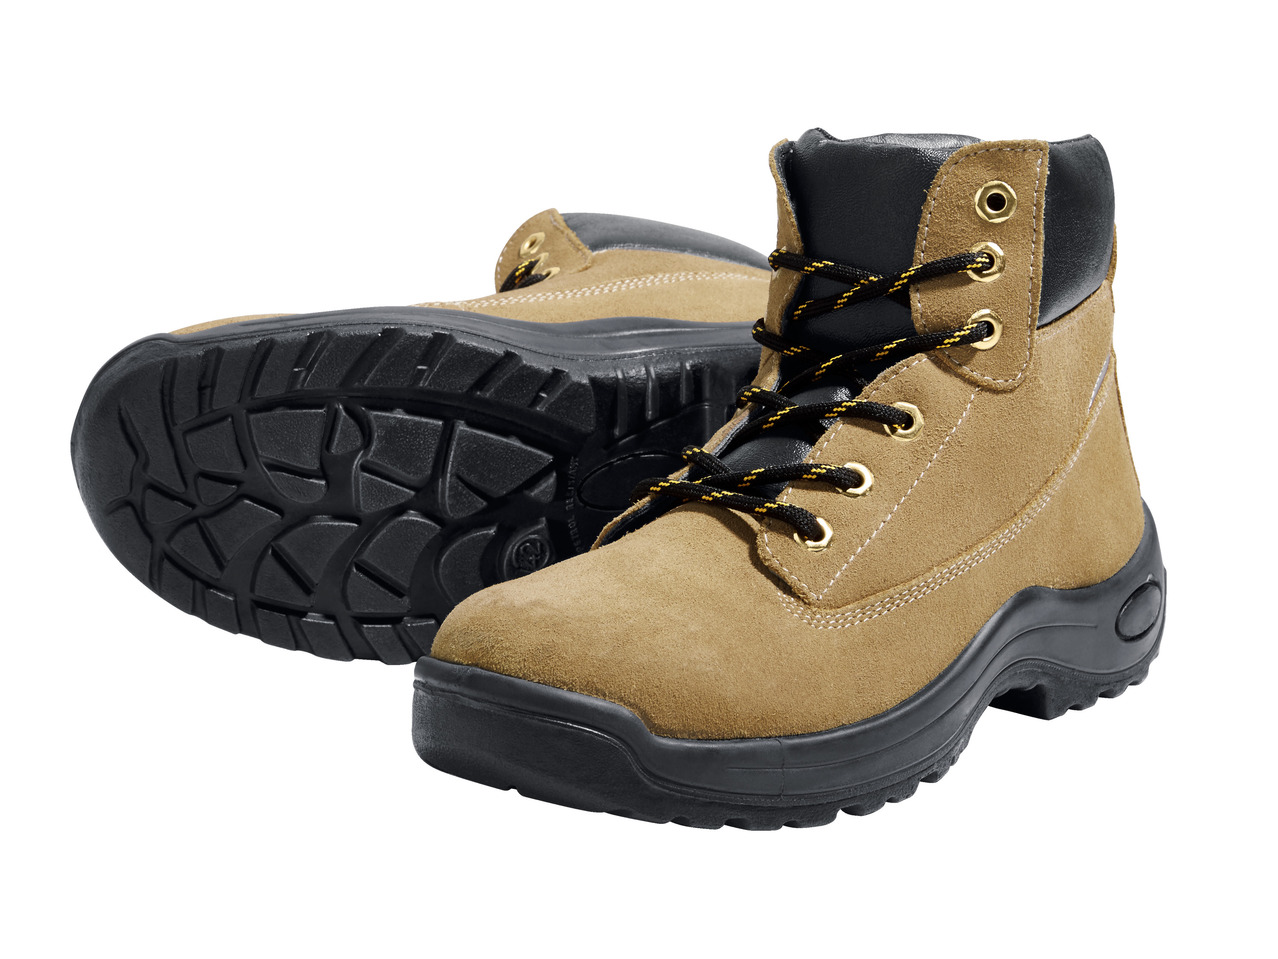 POWERFIX S3 Leather Safety Boots